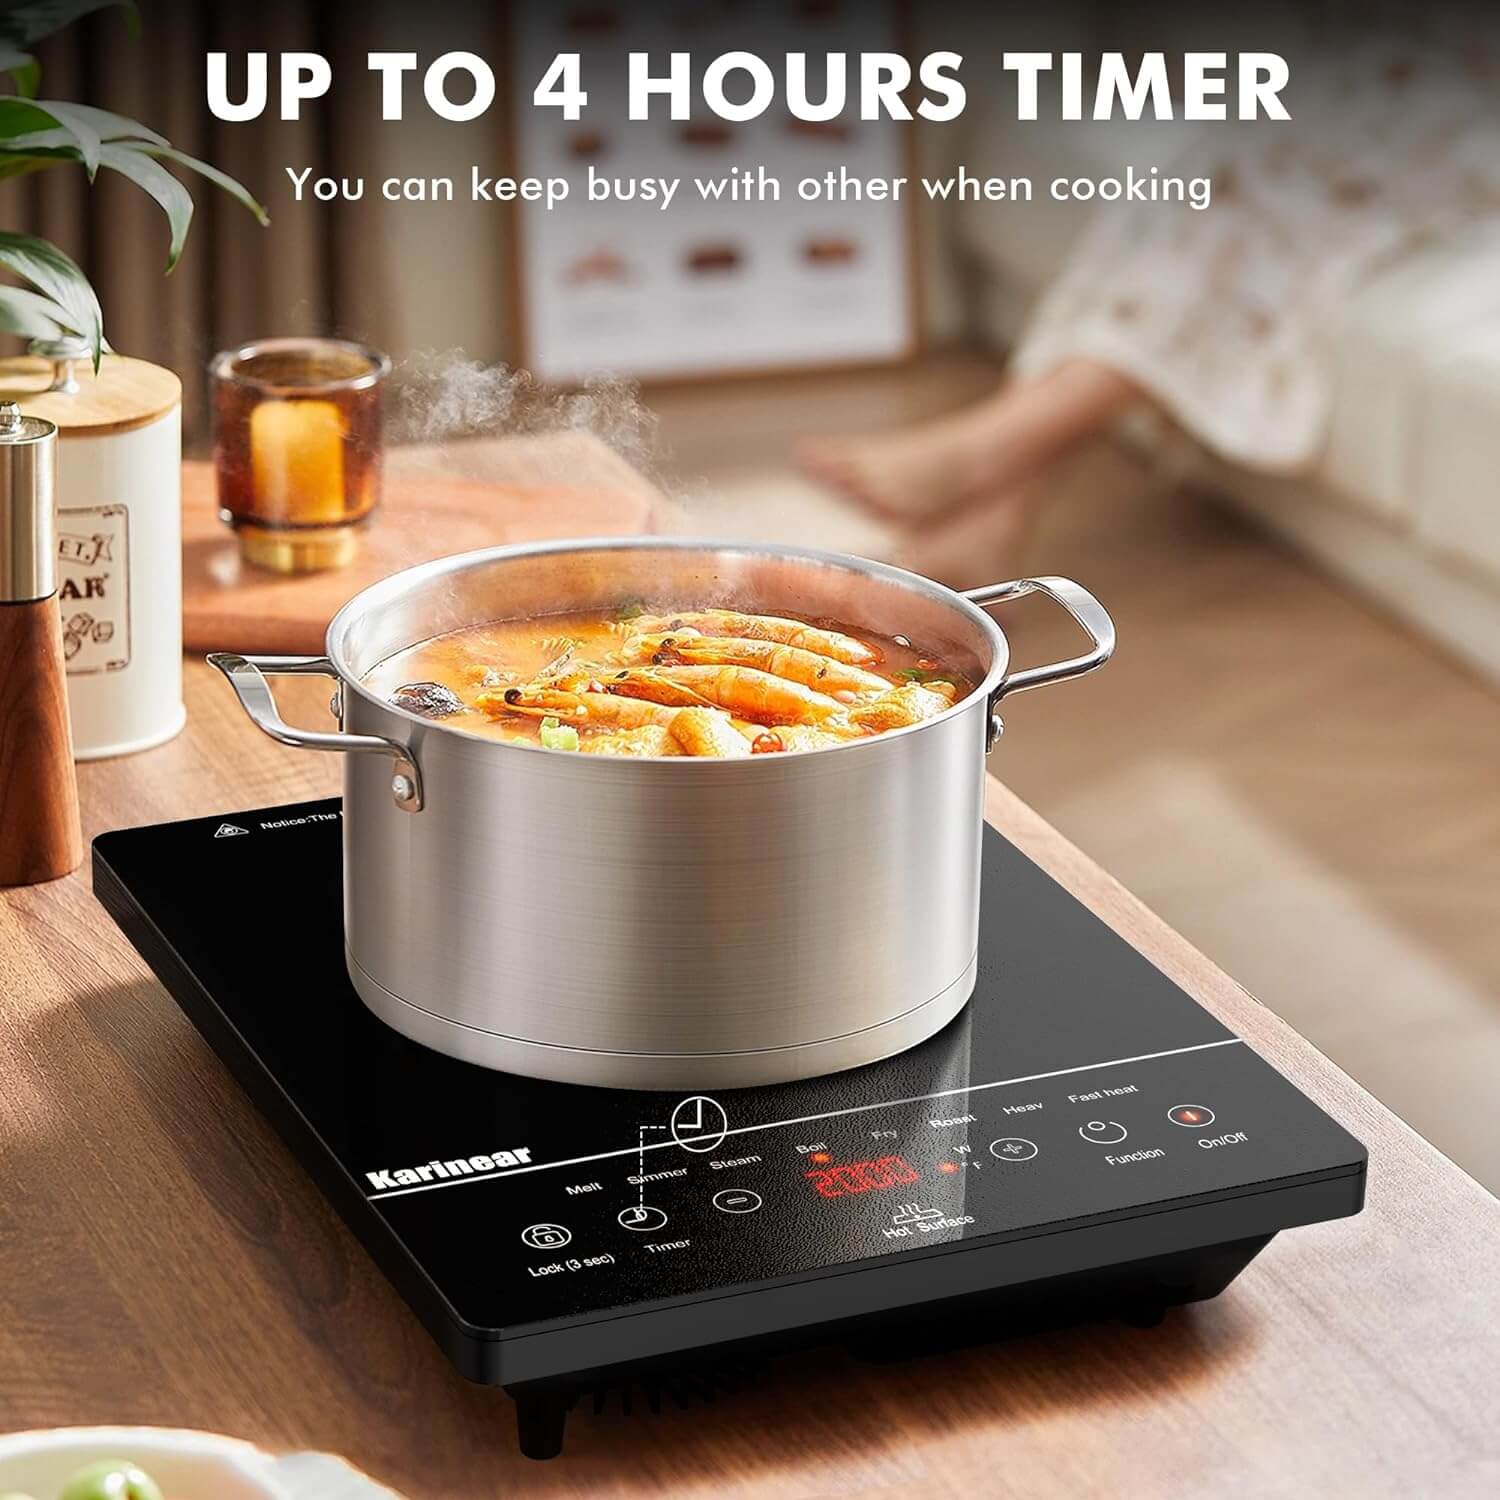 Karinear Portable Ceramic Hob for ALL Cookware, Pulg in Single Electric Hob with 4-Hour Timer, 9 Power Levels Up to 2000W, 8 Pre-set Functions Touch Sensor...